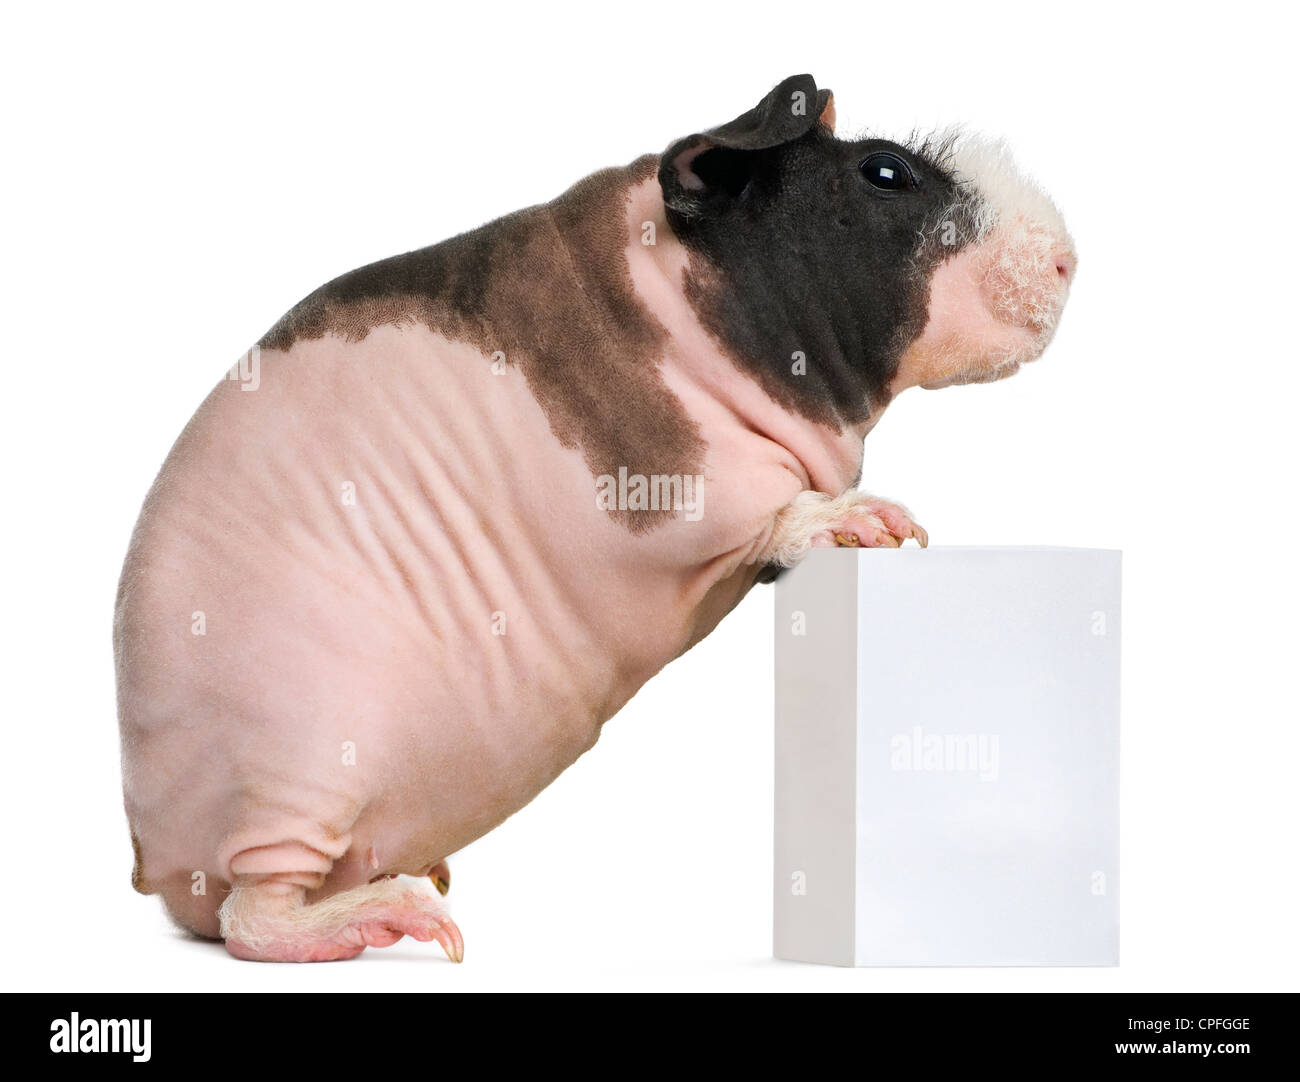 Hairless Guinea Pig standing against white background Stock Photo